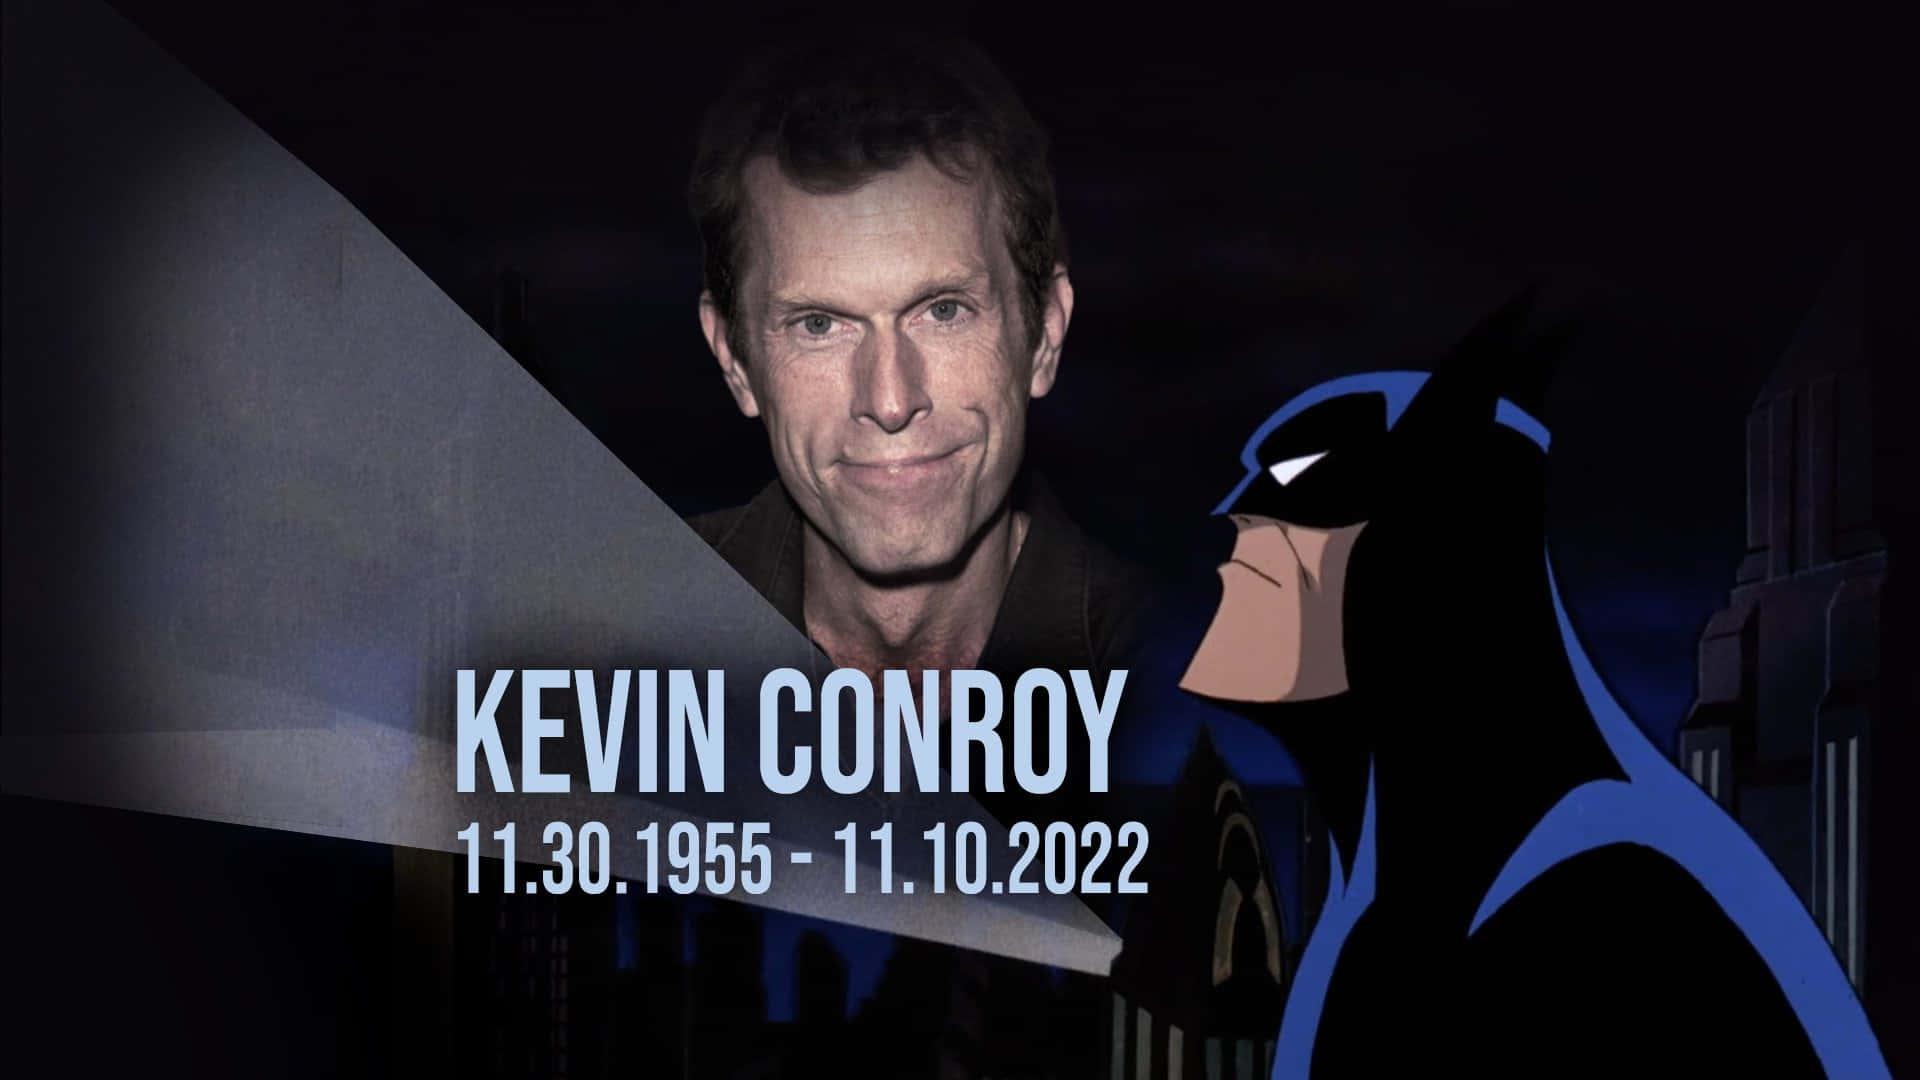 Legendary Voice Actor Kevin Conroy poses for a promotional photo Wallpaper